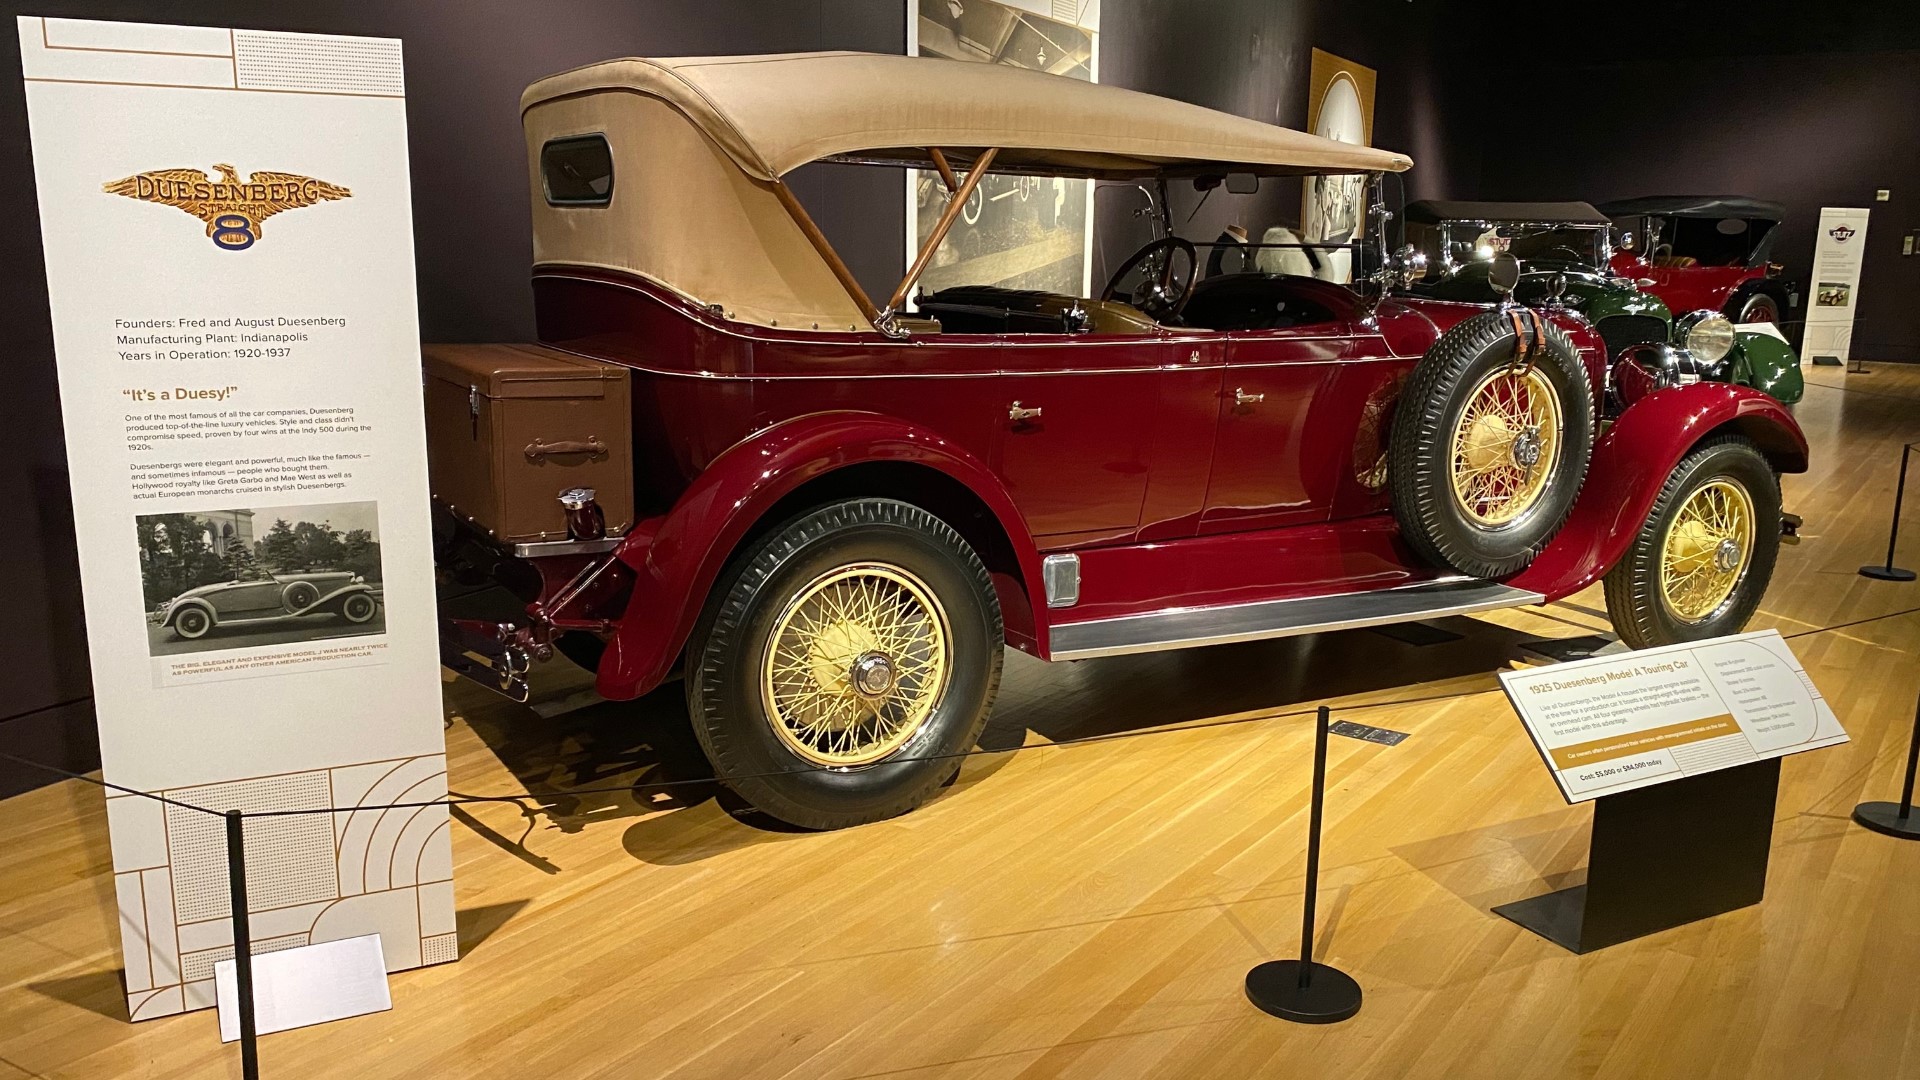 "Vintage Vision: Cars of the 1920s" opens Saturday, Feb. 18 at 10 a.m. inside the State Museum in White River State Park.